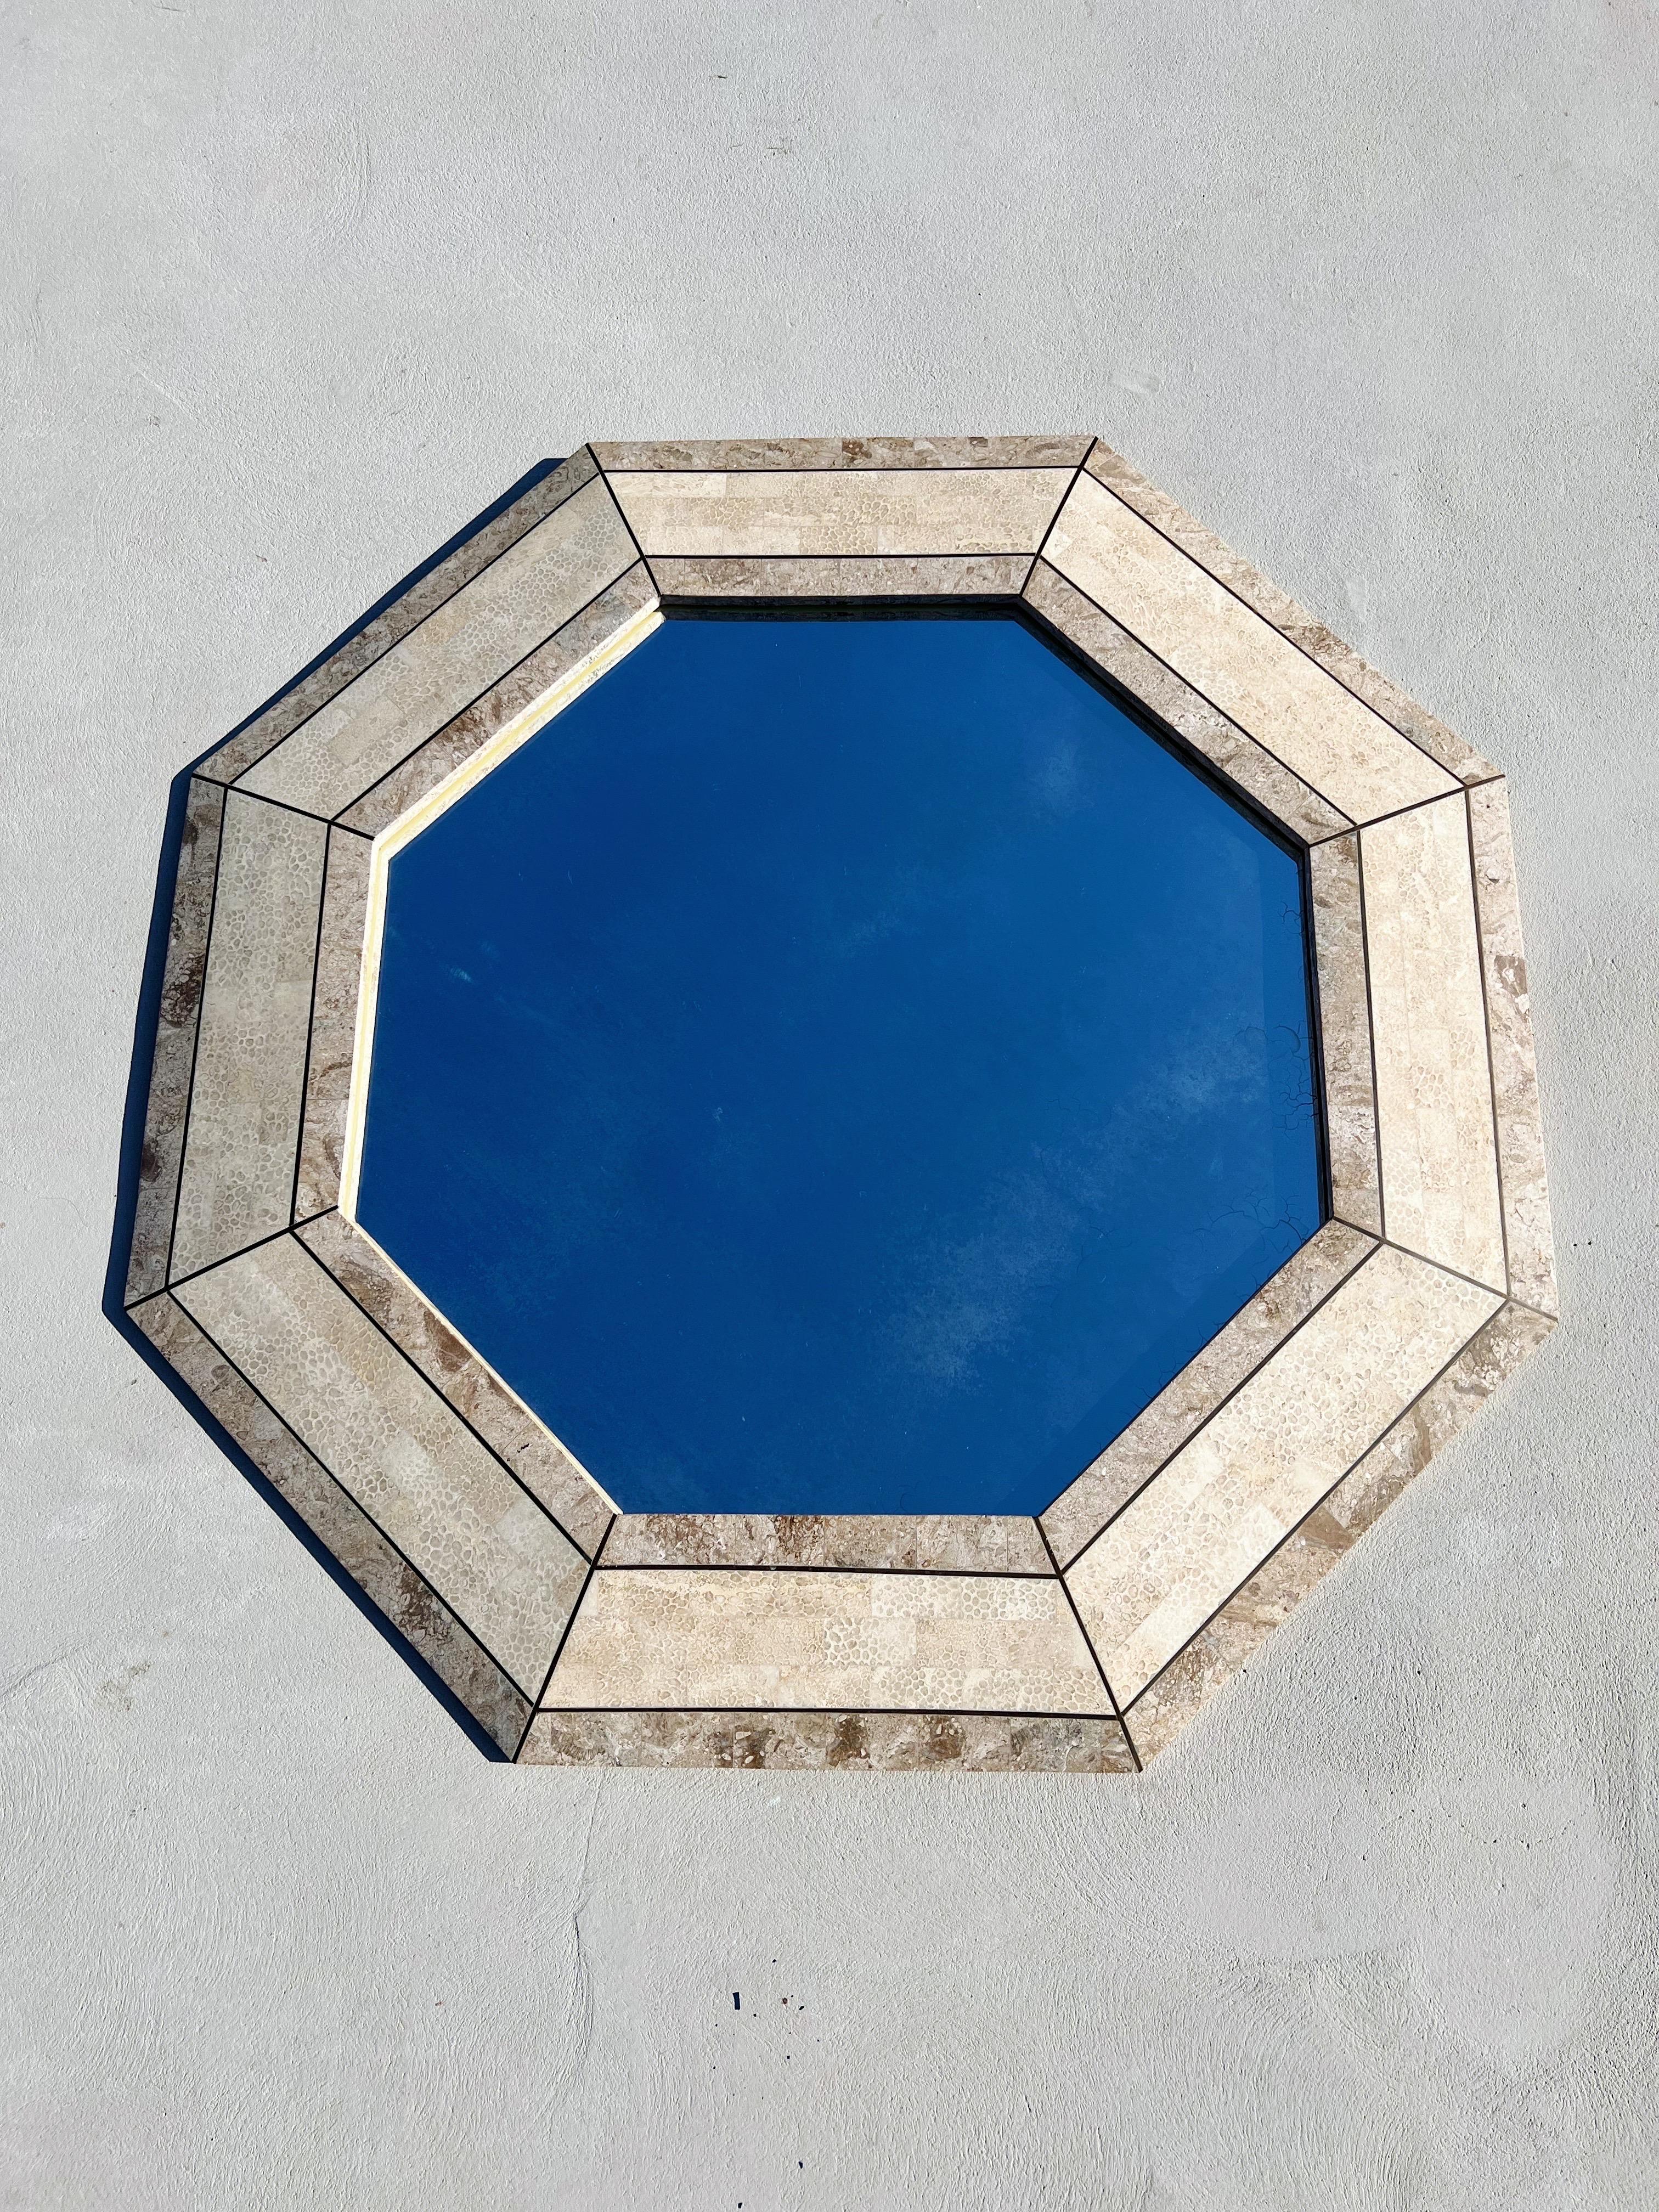 Octagonal Tessellated Mactan Stone Fossil Mirror, Attributed to Maitland Smith

Mactan stone is a fossilized stone quarried off the islands of the Philippines. It is quarried, cut, polished and hand-tiled into a framework- such as this mirror.